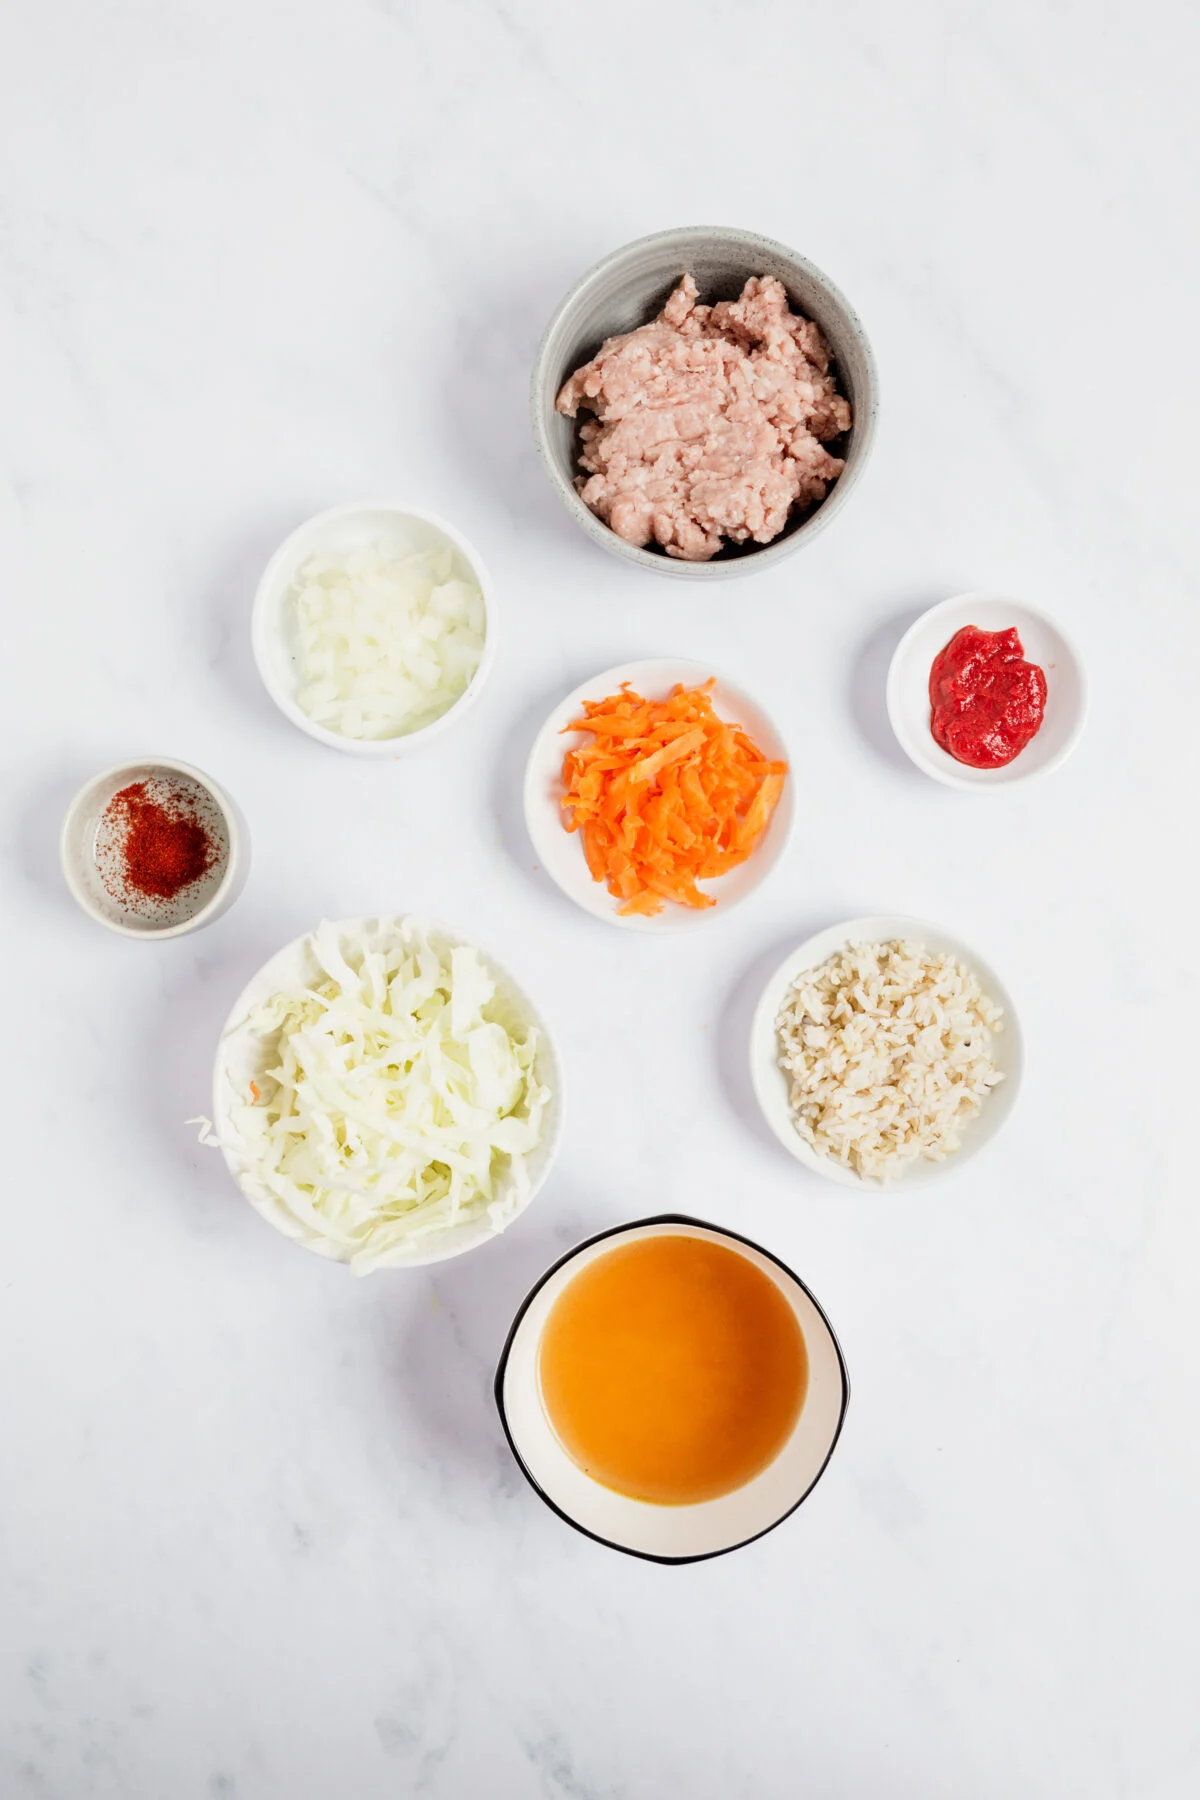 Ingredients for Chicken and Cabbage Skillet,